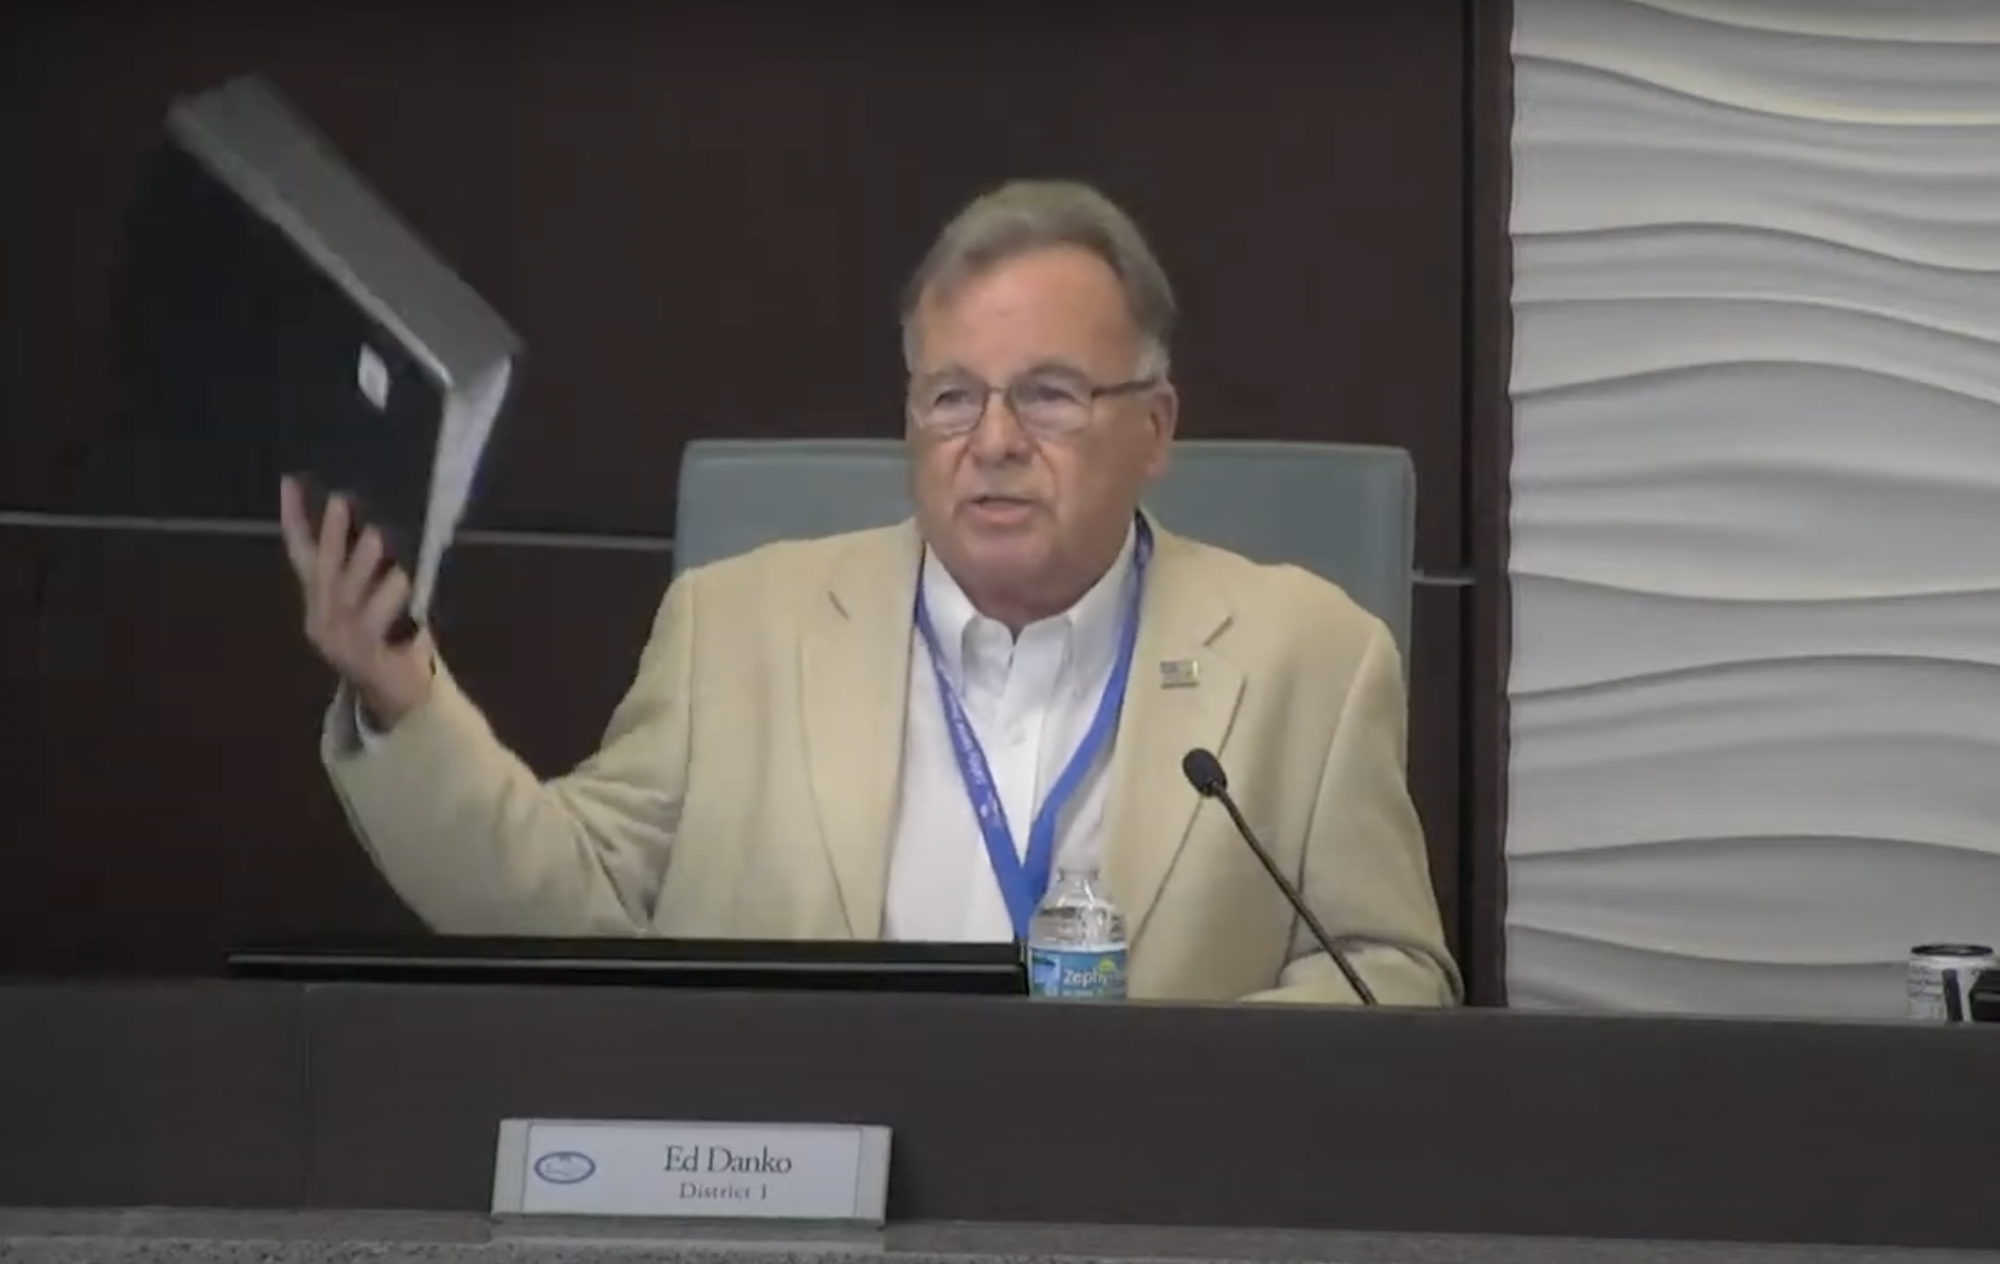 Palm Coast City Councilman Ed Danko holds up a copy of the city budget during a Sept. 8 City Council millage hearing. Image from city meeting livestream